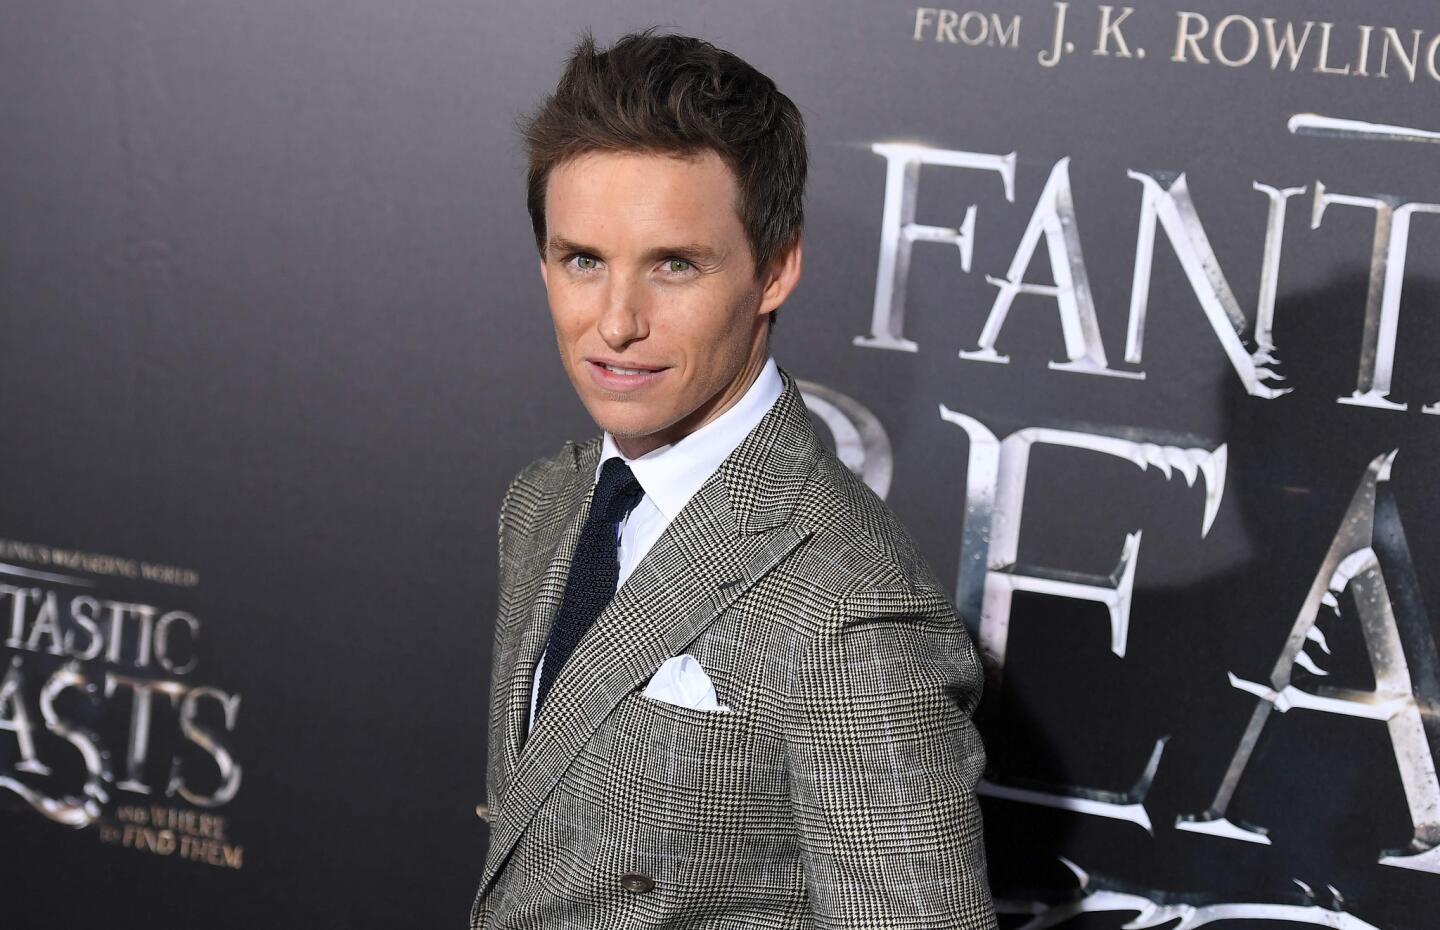 'Fantastic Beasts and Where to Find Them' premiere